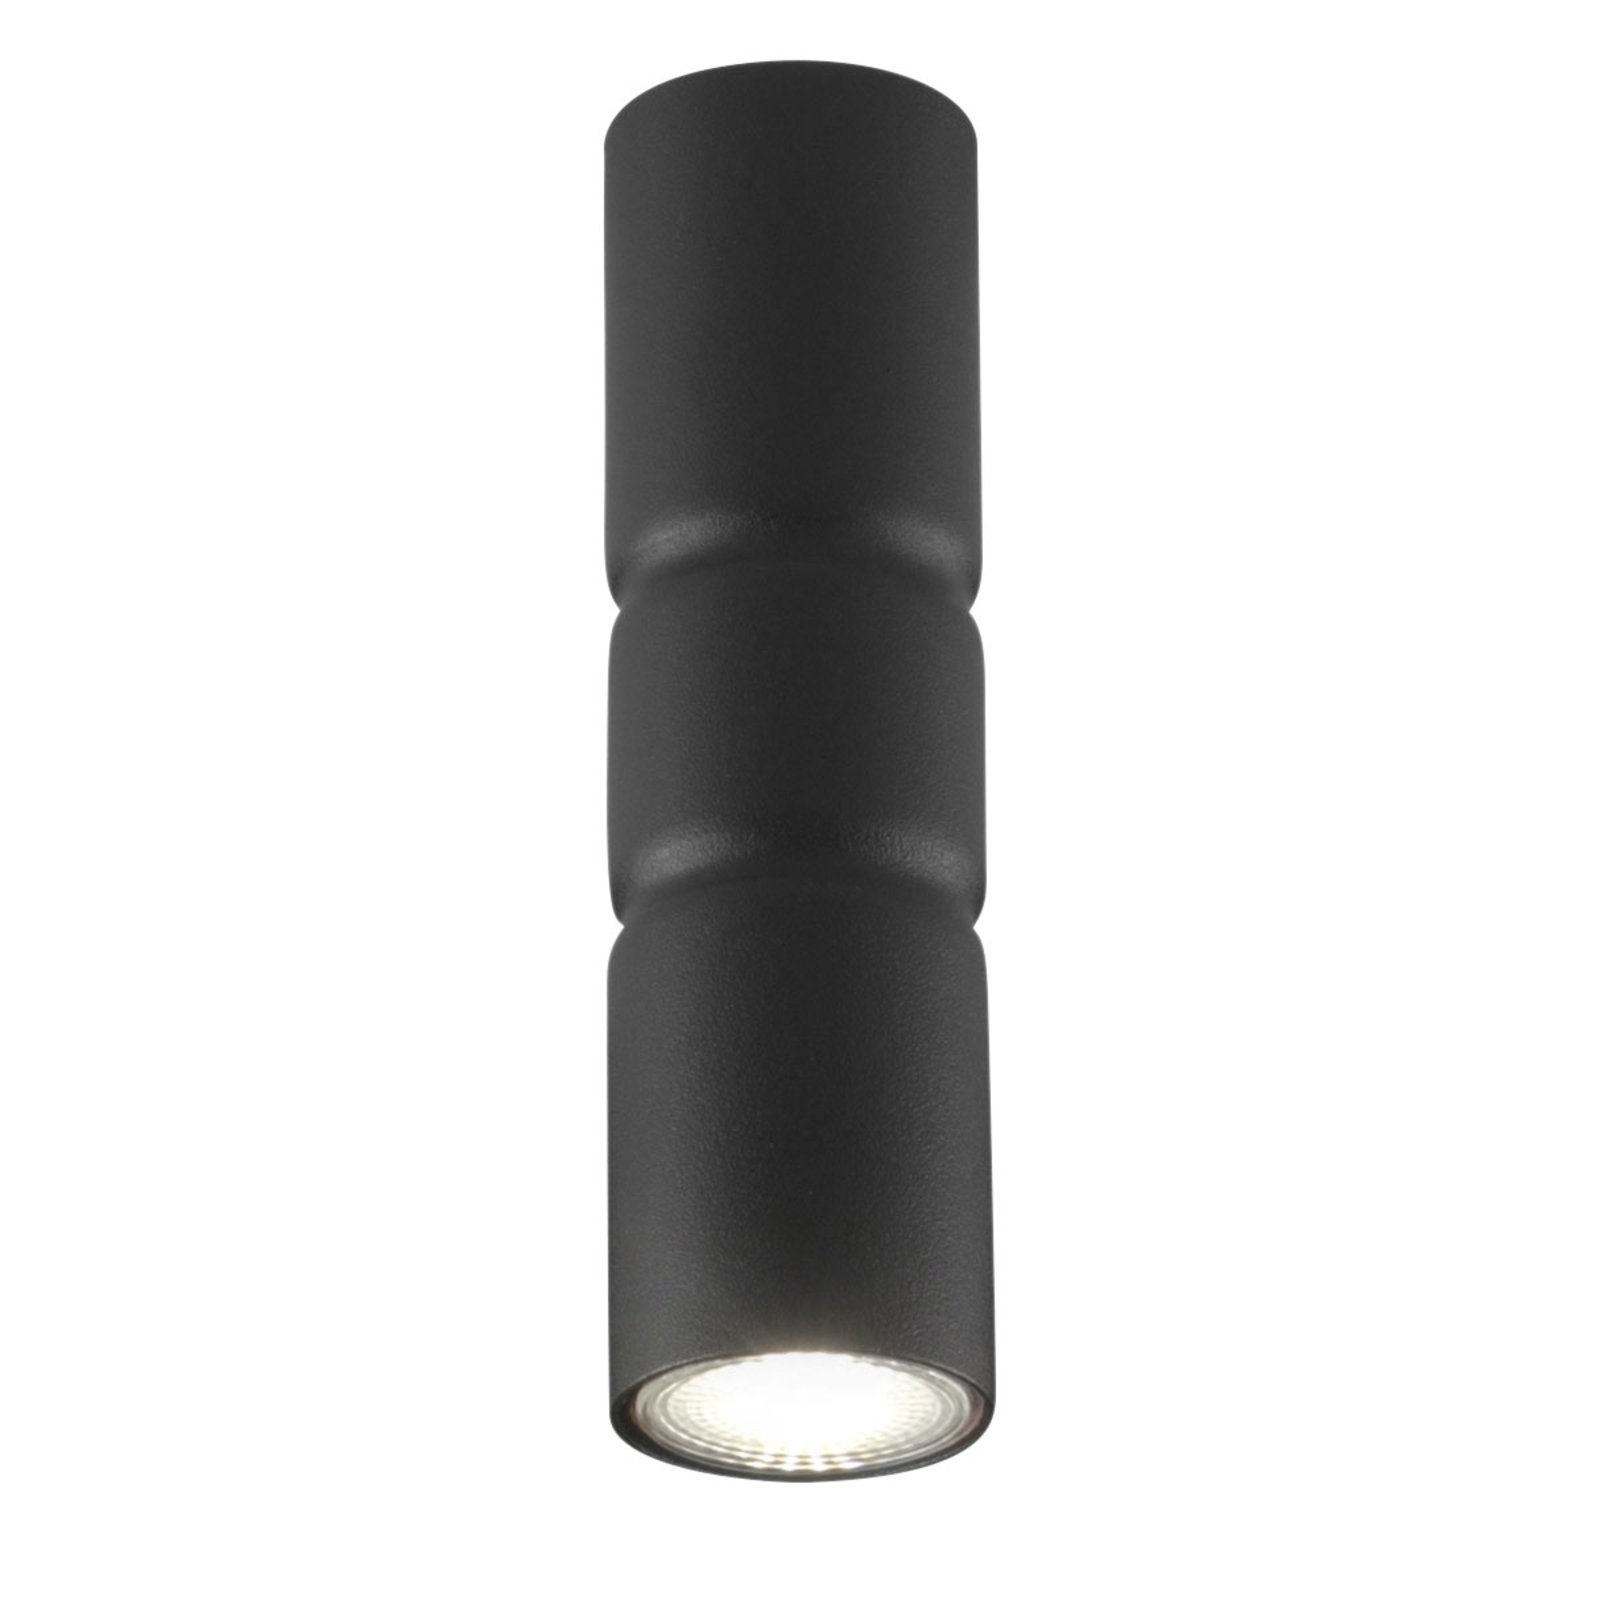 Turbo surface-mounted ceiling light, fixed, black